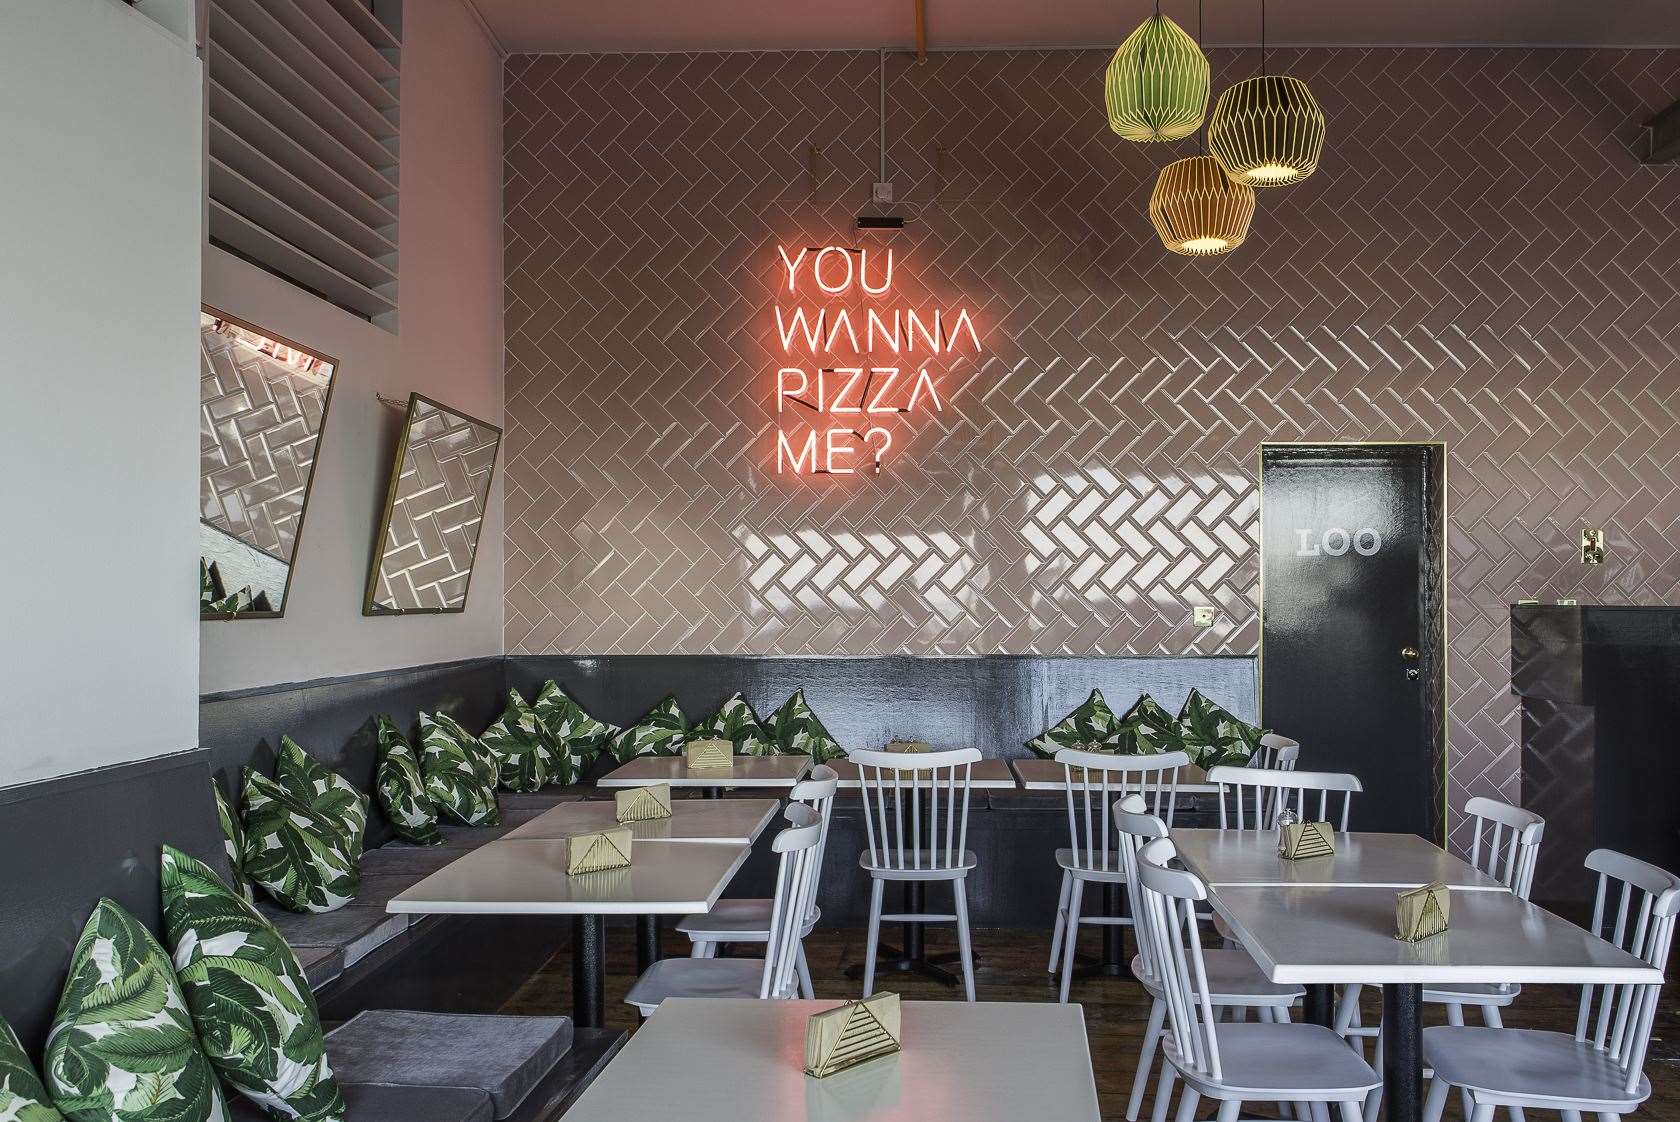 GB Pizza Co in Margate